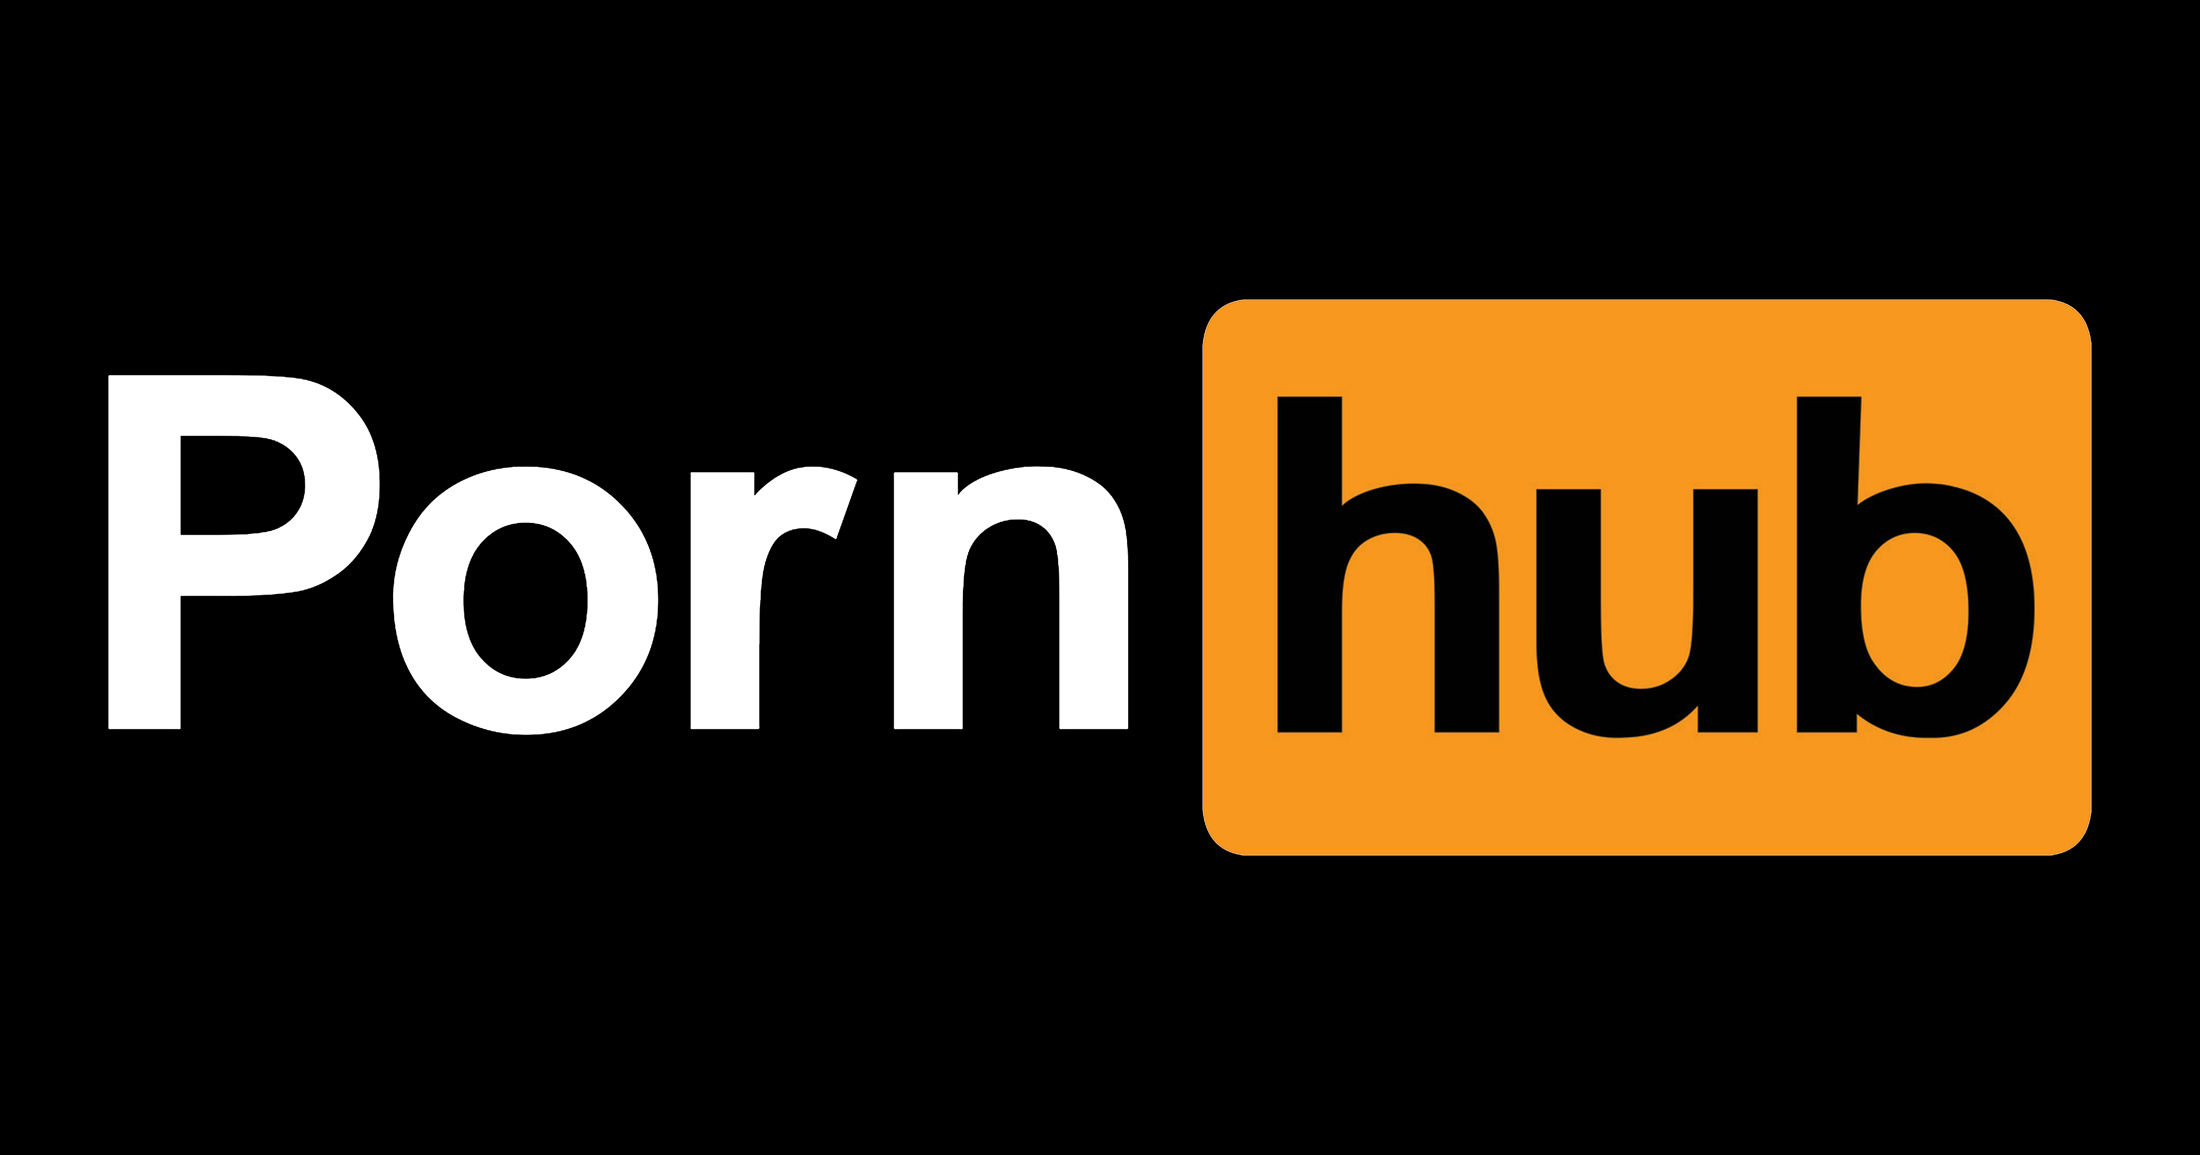 Pronhb - Pornhub Logo and symbol, meaning, history, PNG, new